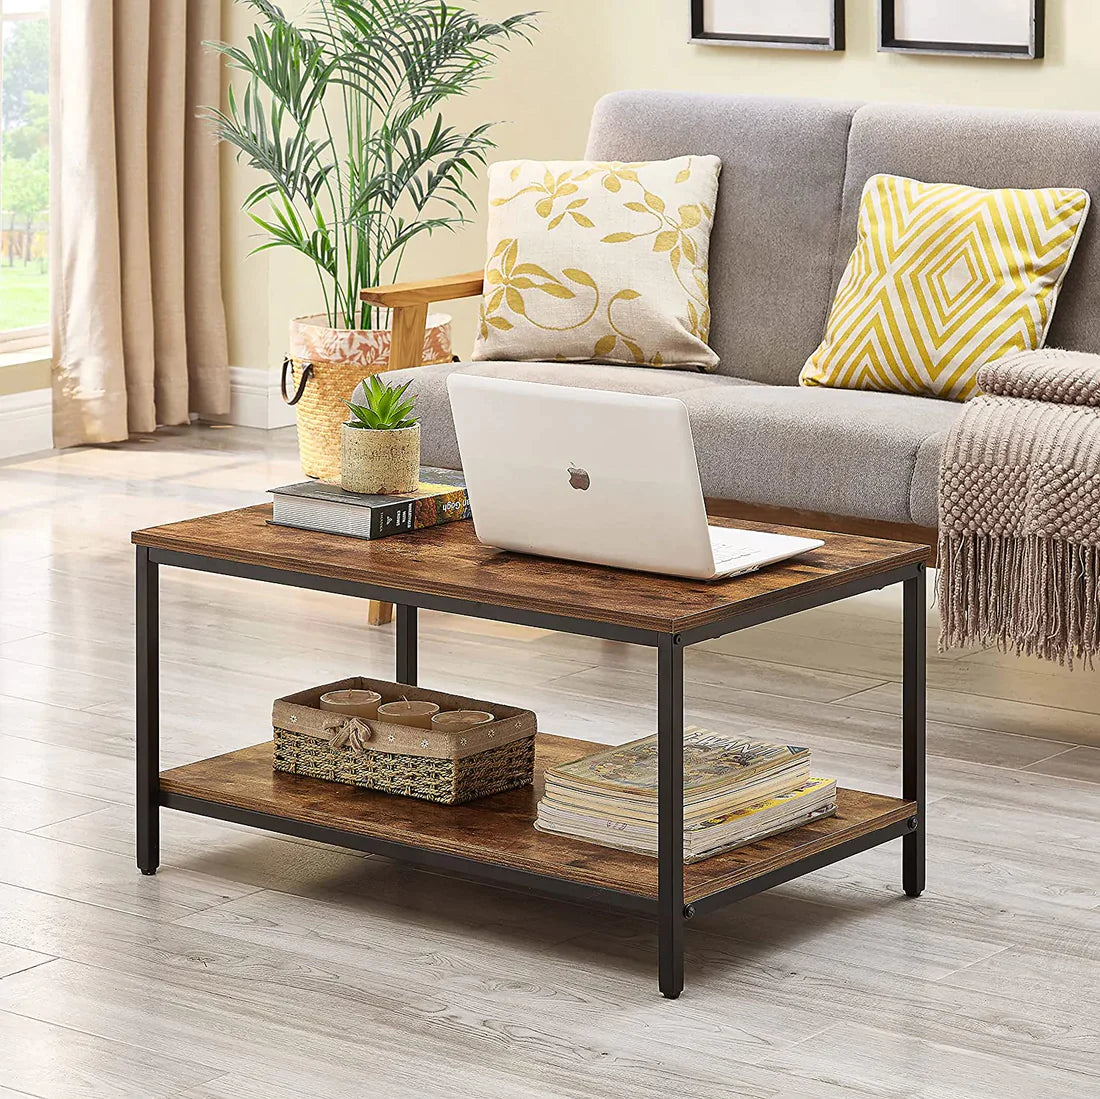 Sauder North Avenue center Coffee Table with Metal Frame